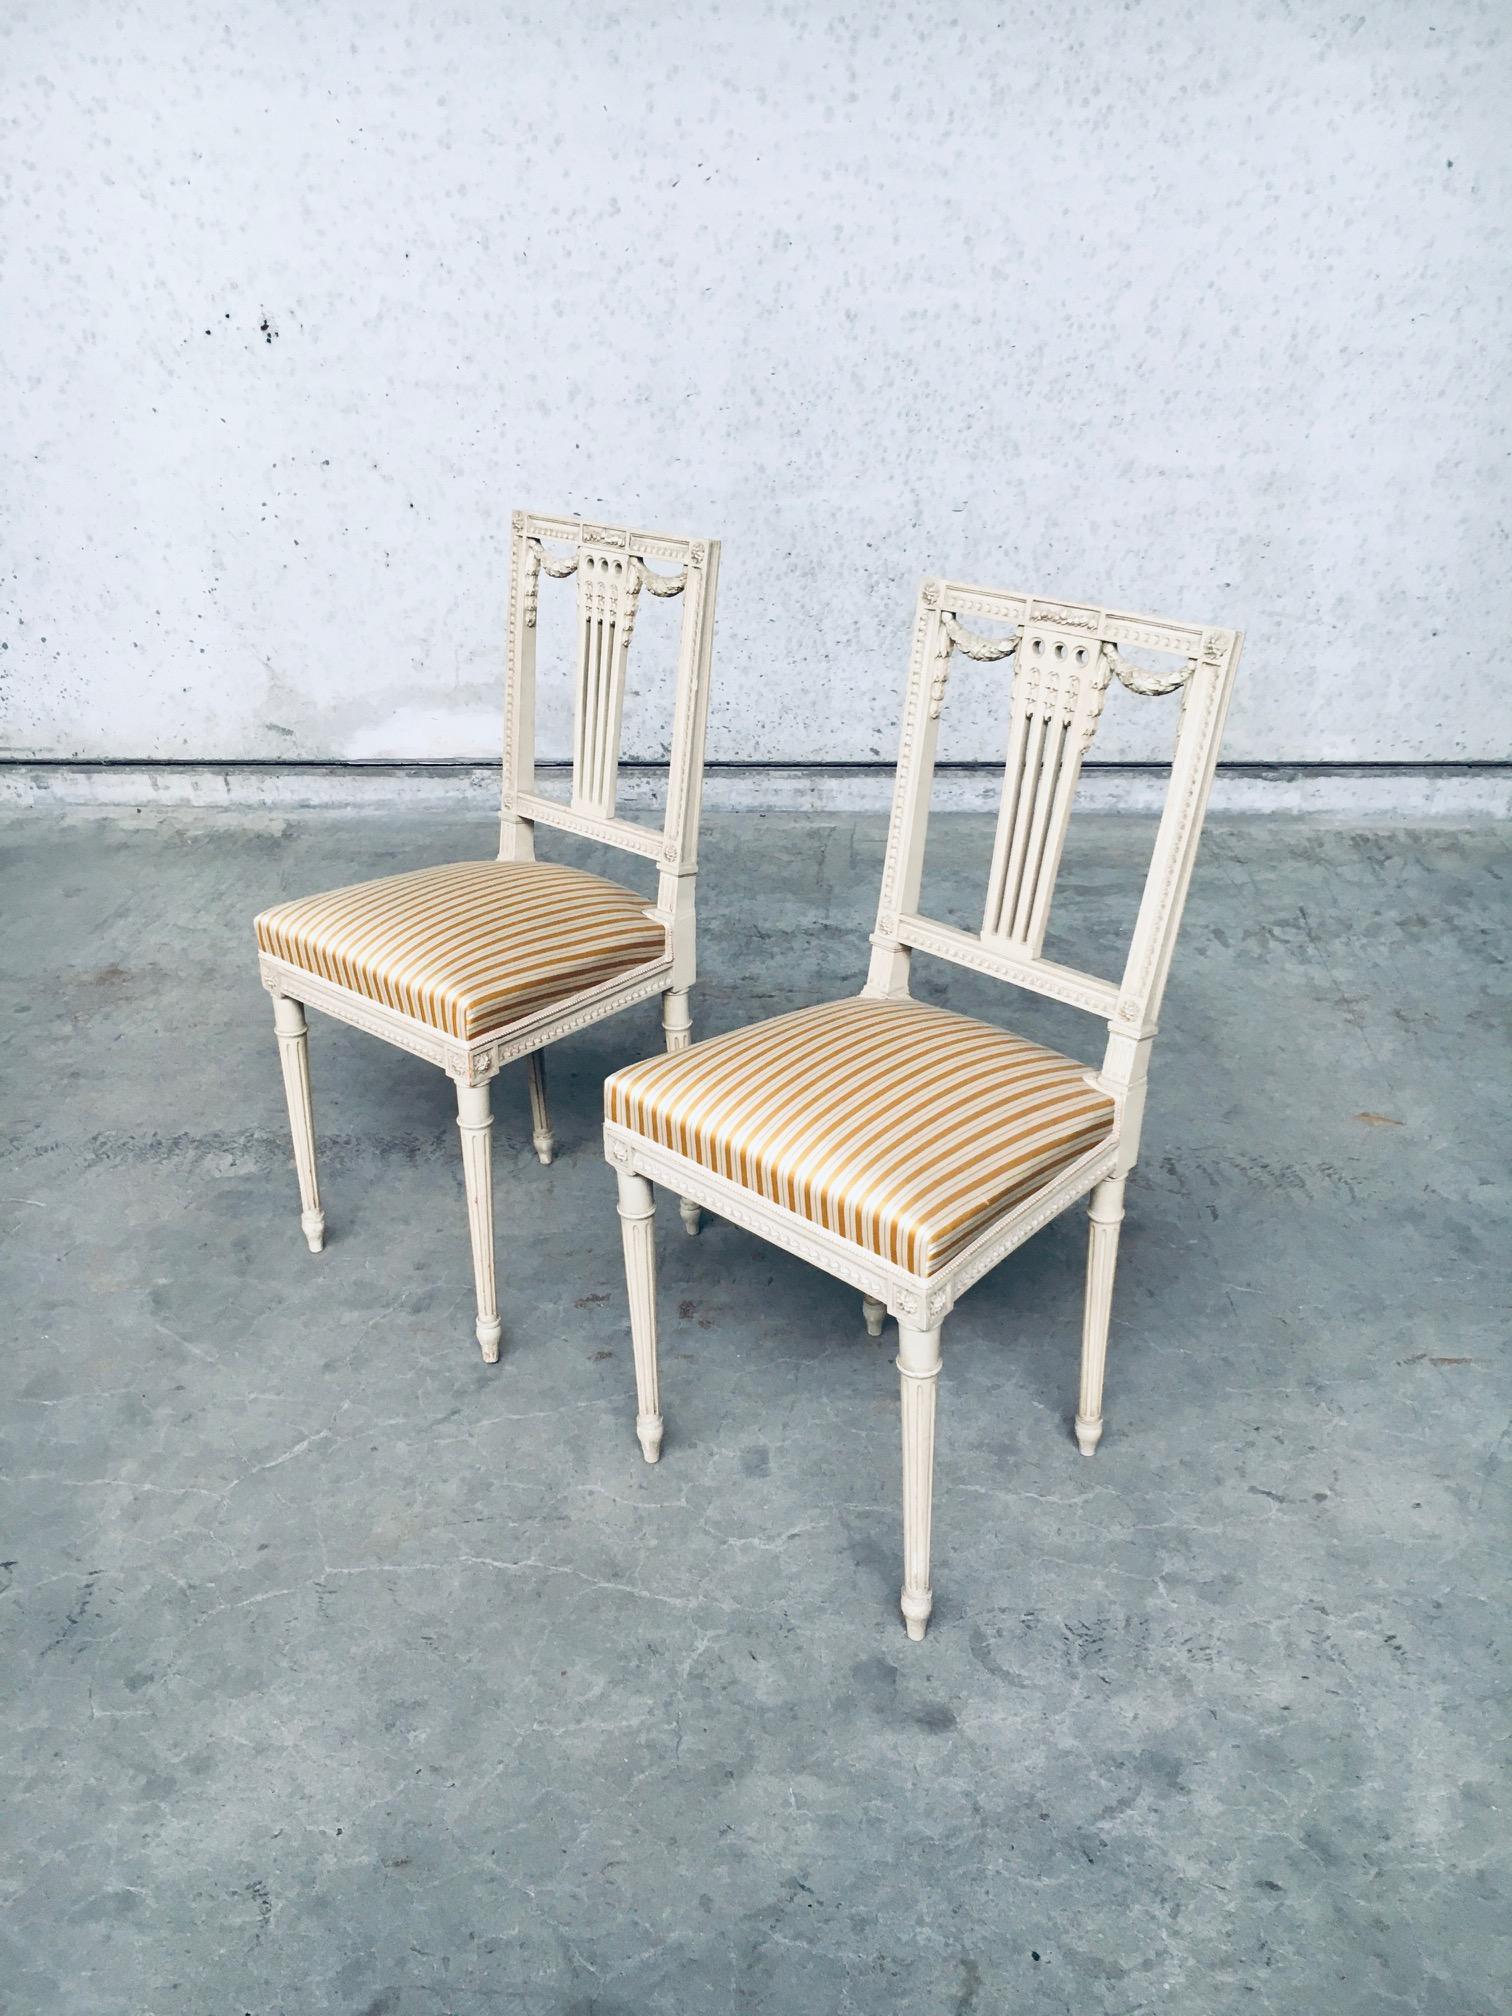 Vintage Antique Belle Epoque French Louis XVI Style design dining chair set of 2, made in France 1940's. Original cream paint patinated leaf and flower carved frame with silk fabric seats. Both are in very good, original condition. Wear and patina